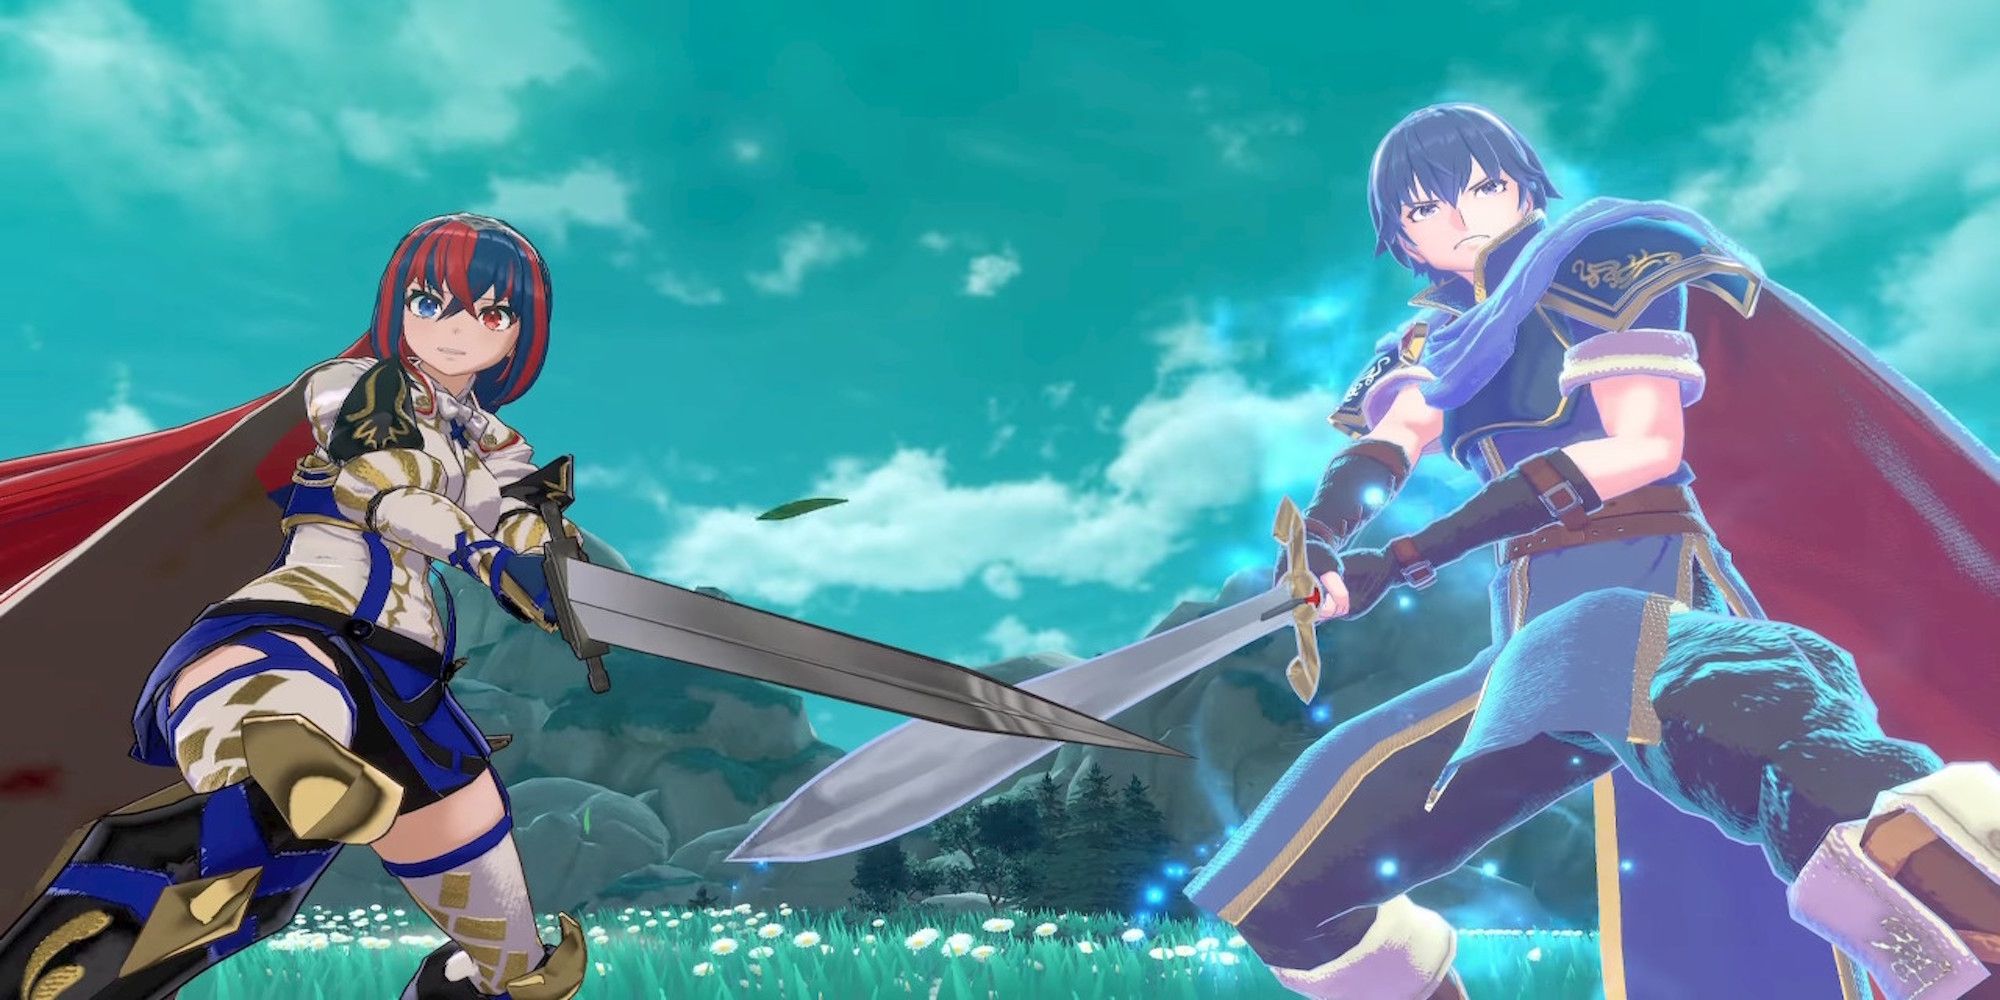 Alear and Marth in Fire Emblem Engage